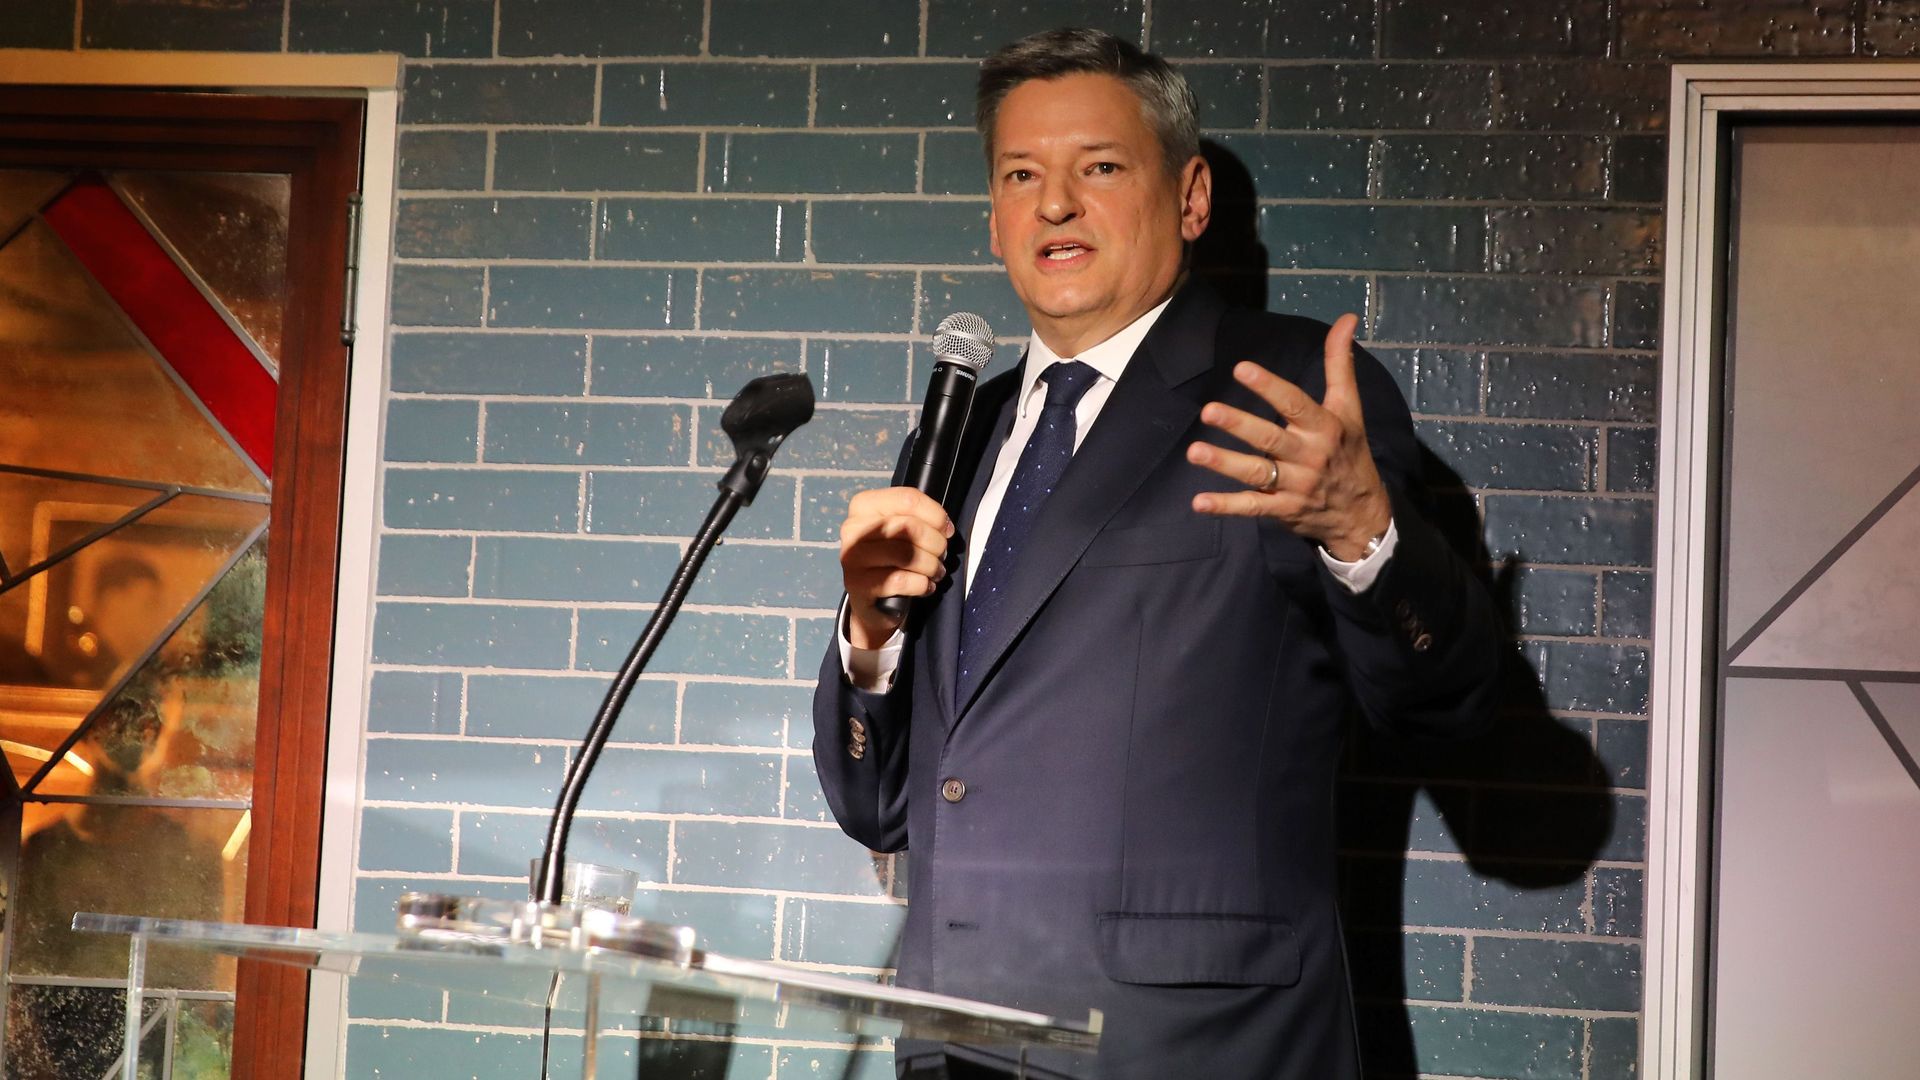  Netflix Chief Content Officer Ted Sarandos speaks at Ted's 2020 Oscar Nominee Toast at Craig's on February 08, 2020 in West Hollywood, California.